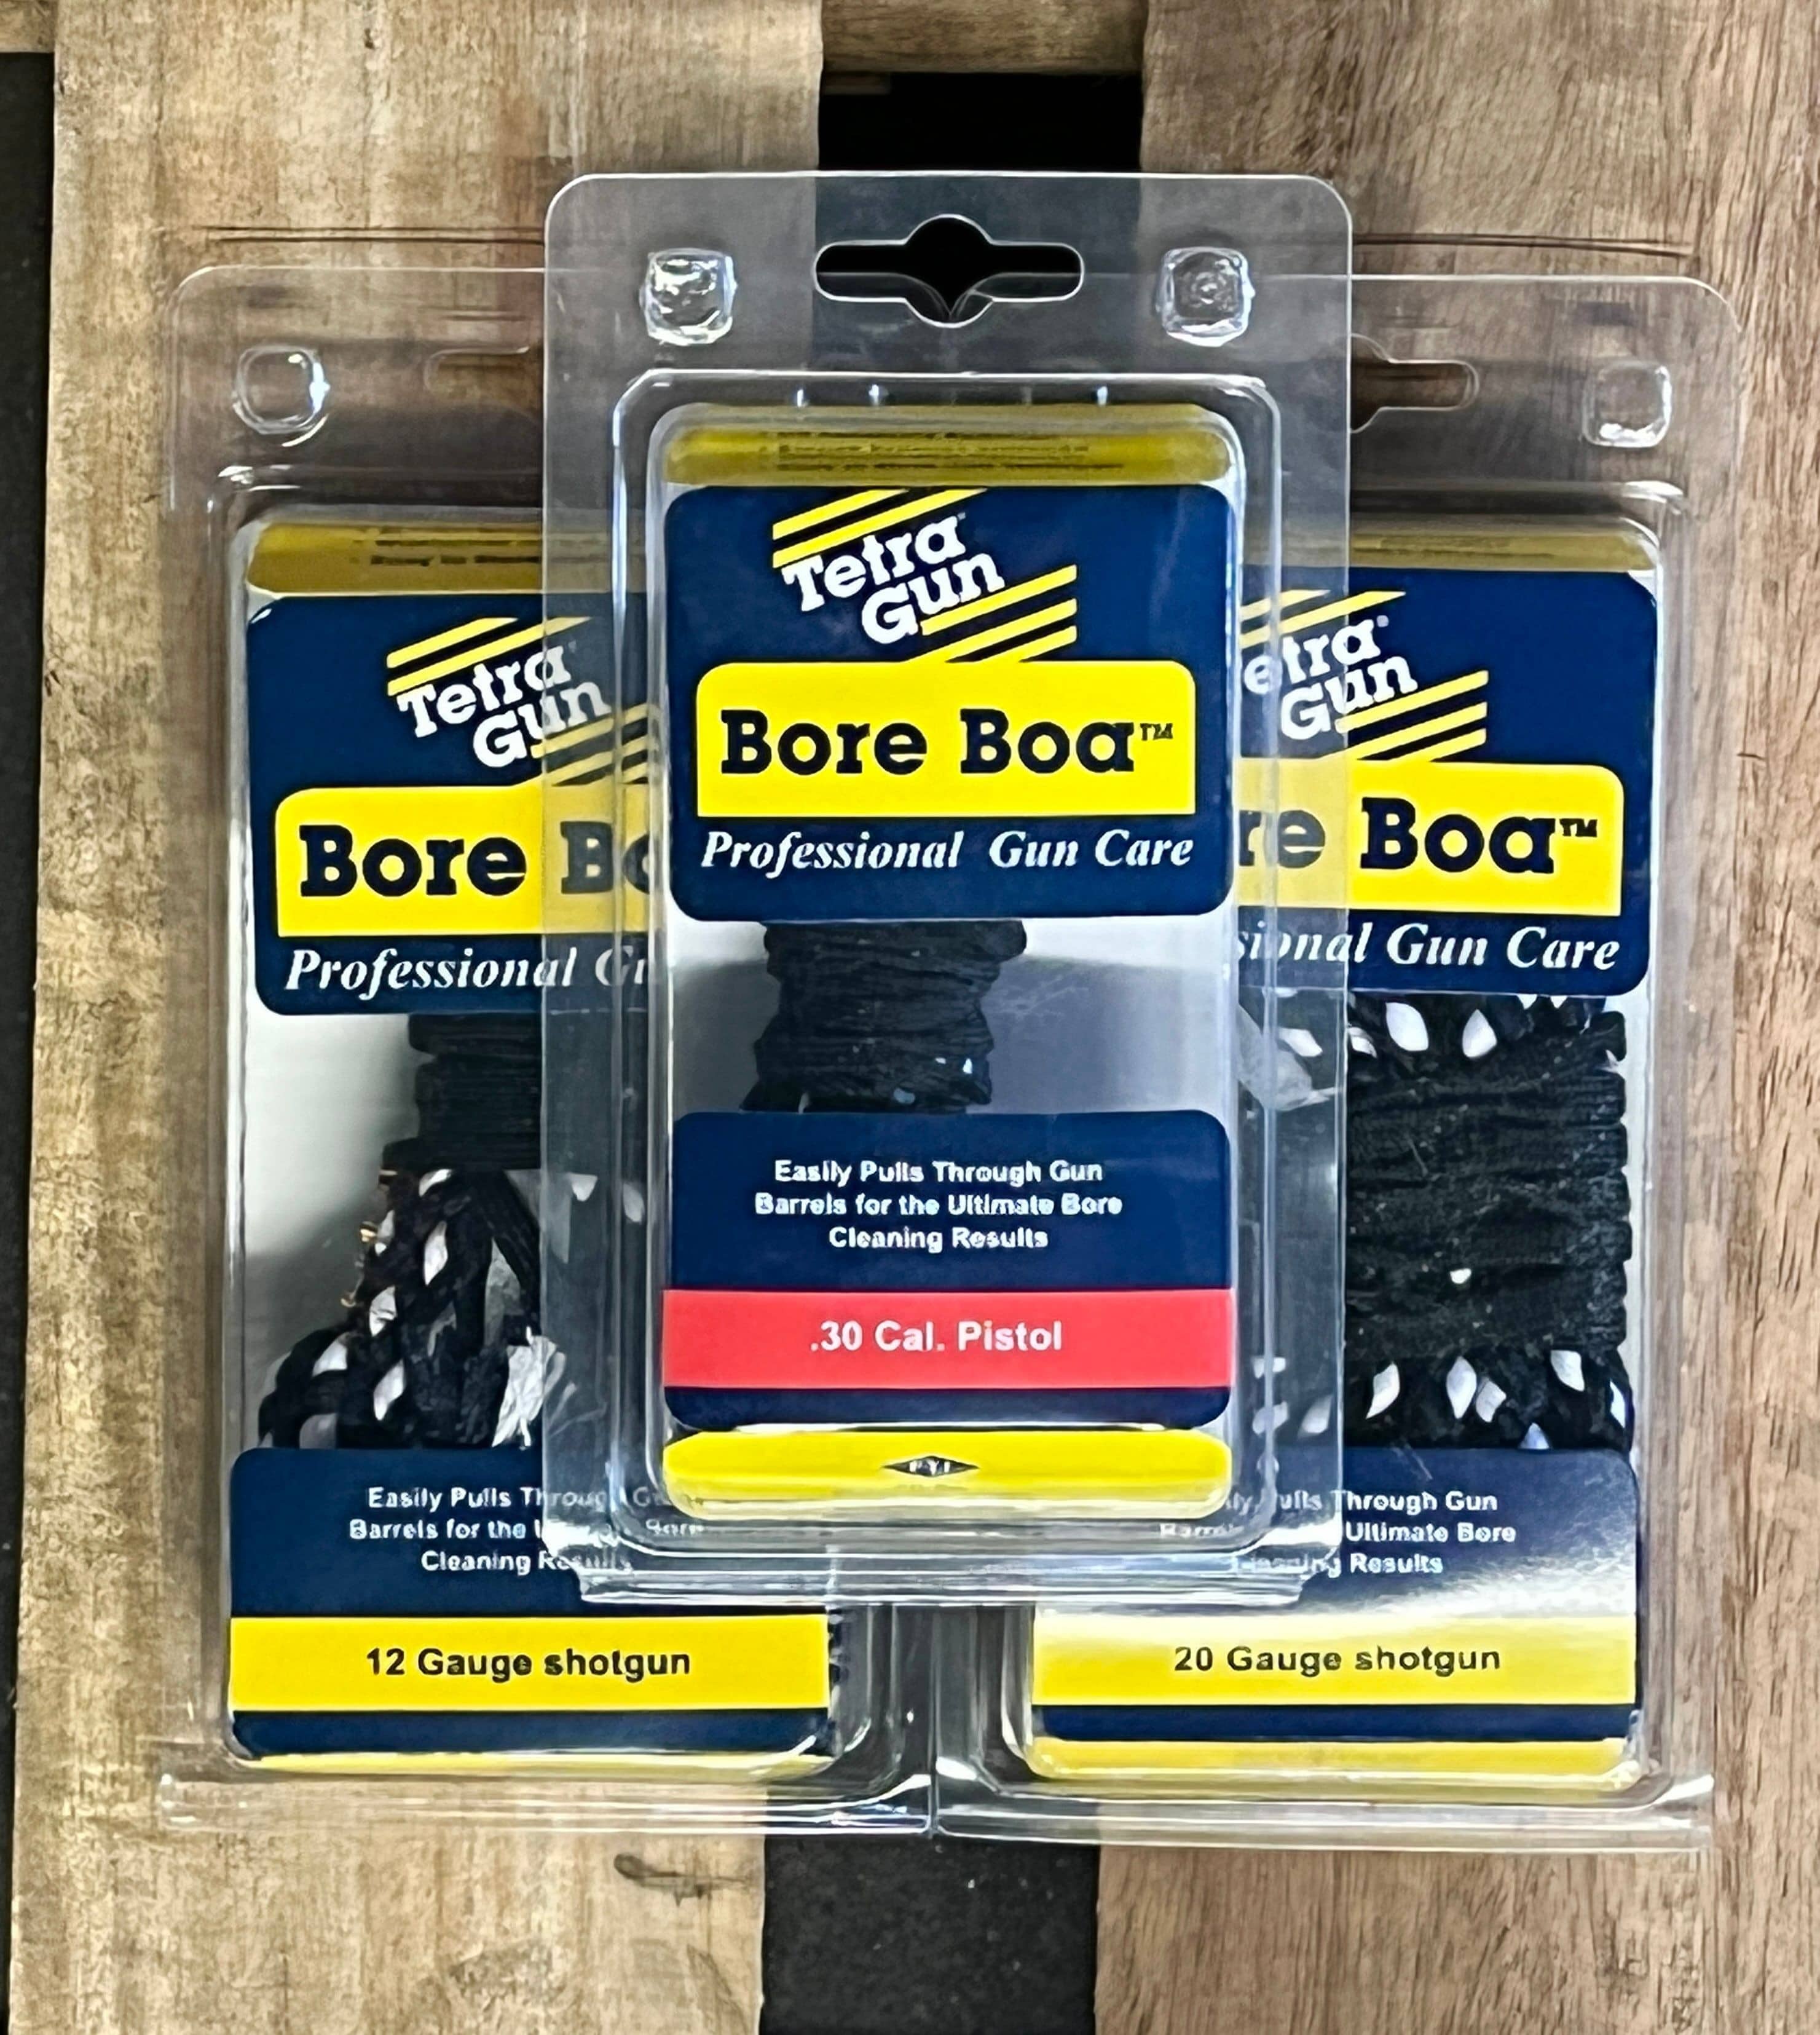 Bore Boa bore cleaning rope.  Good fit to all calibers - 9mm, 22cal, 30cal, 12ga, 20ga, 6.5mm, 270cal, 243cal, 40cal, 45cal, 17cal, 410ga, 28ga, 32cal, 7.92/8mm